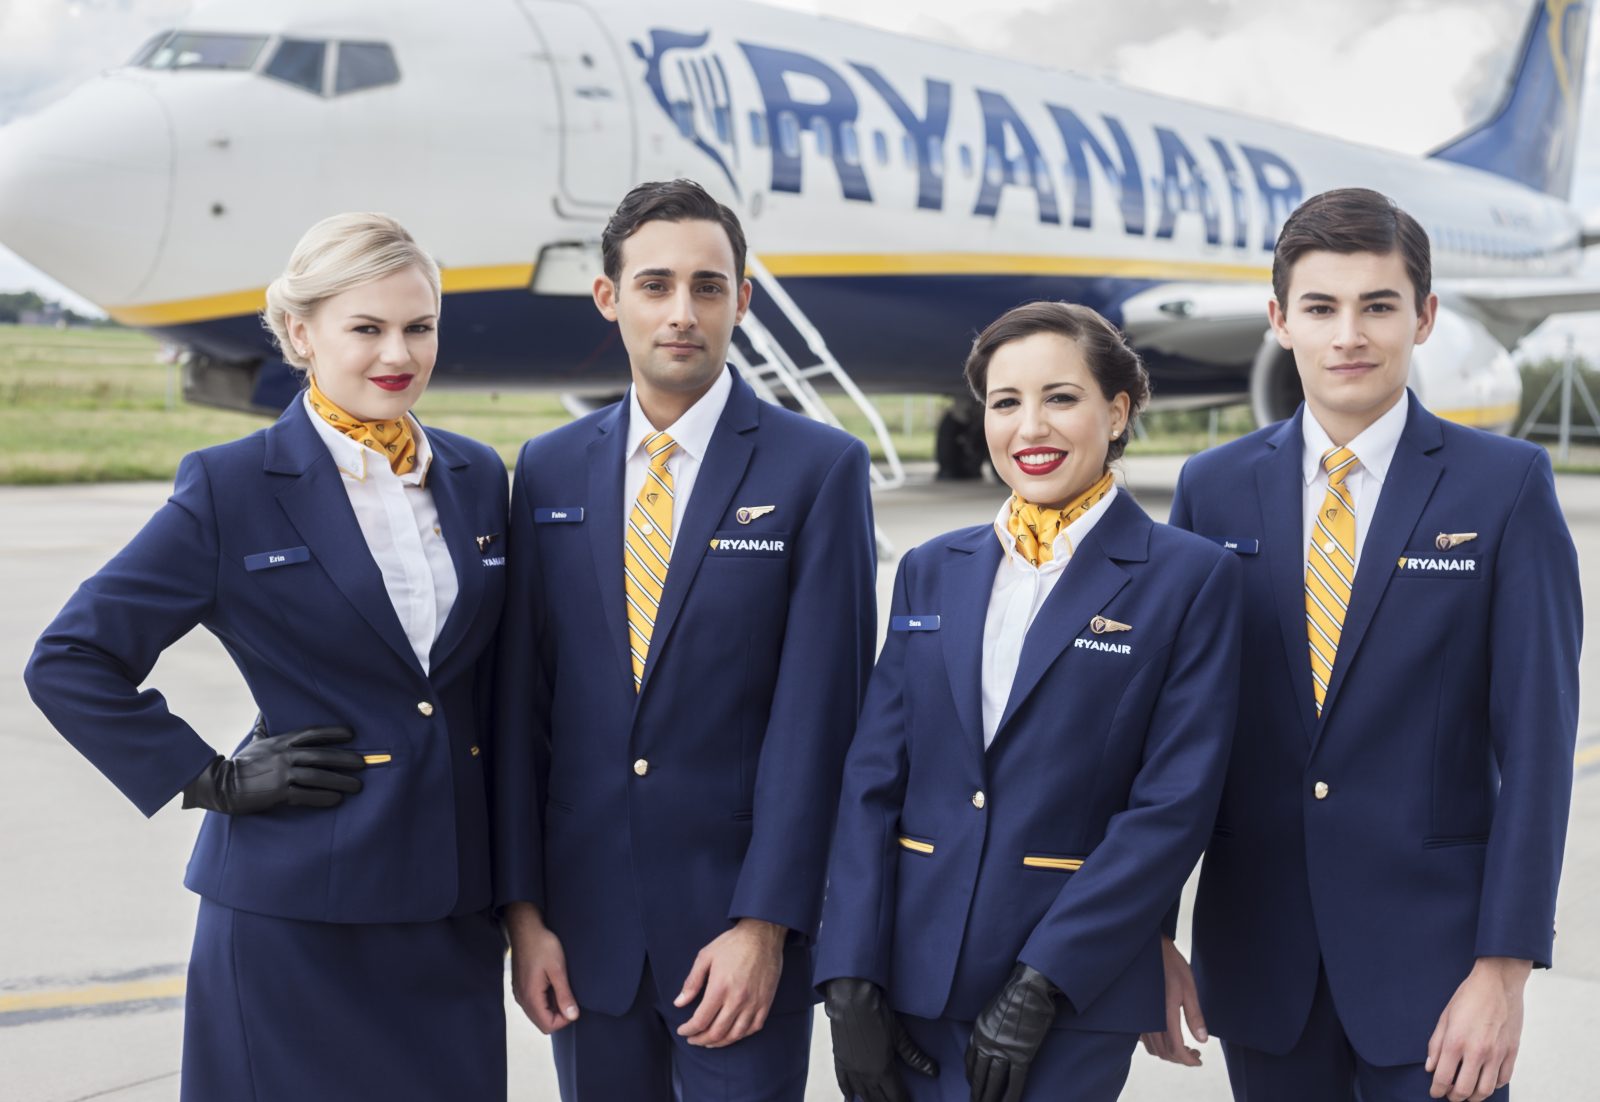 Ryanair Cabin Crew Are Set to Come Together for the First Time and Demand Better Working Conditions